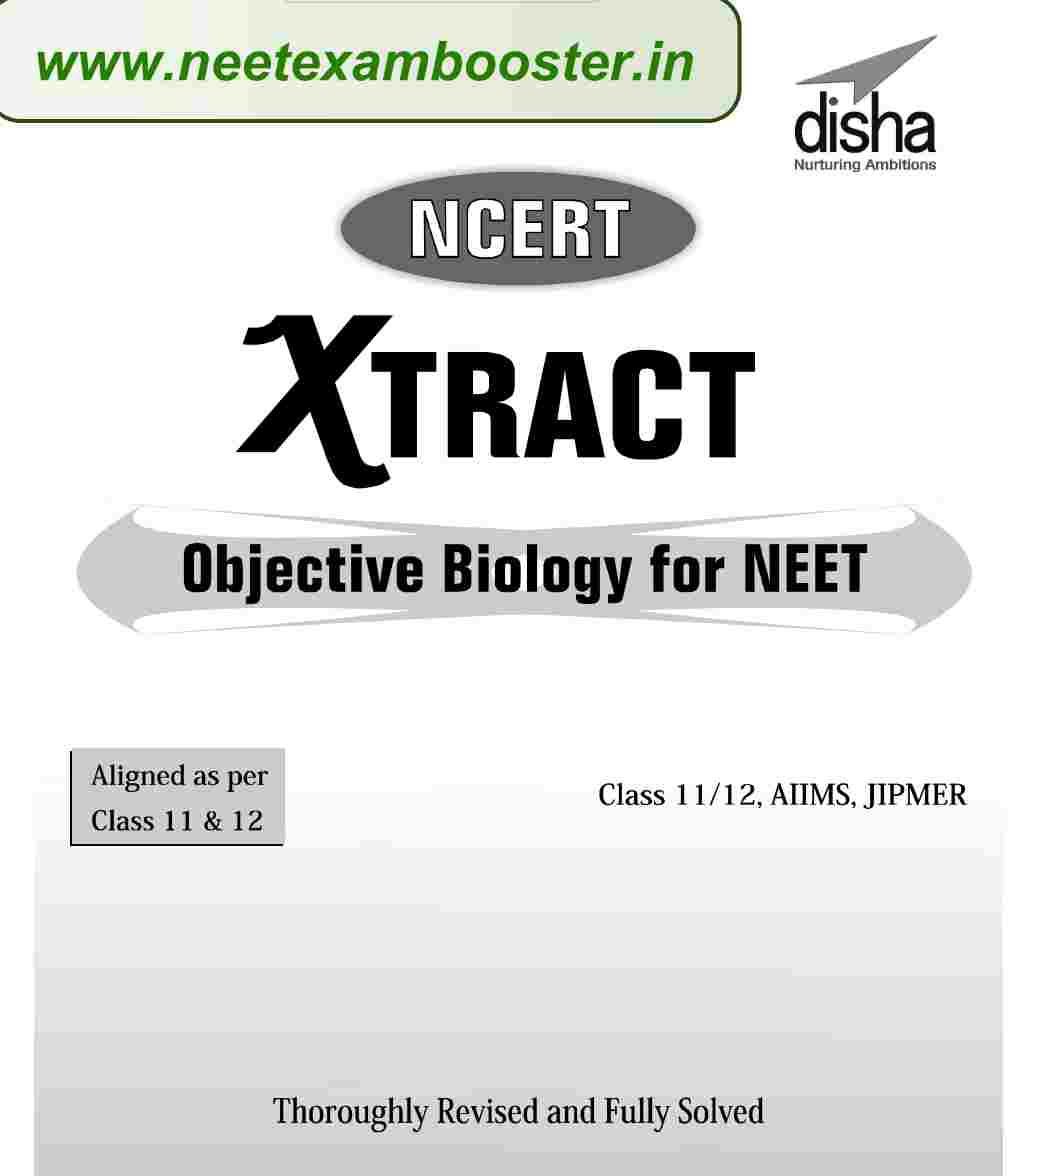 NCERT EXTRACT Objective Biology pdf

